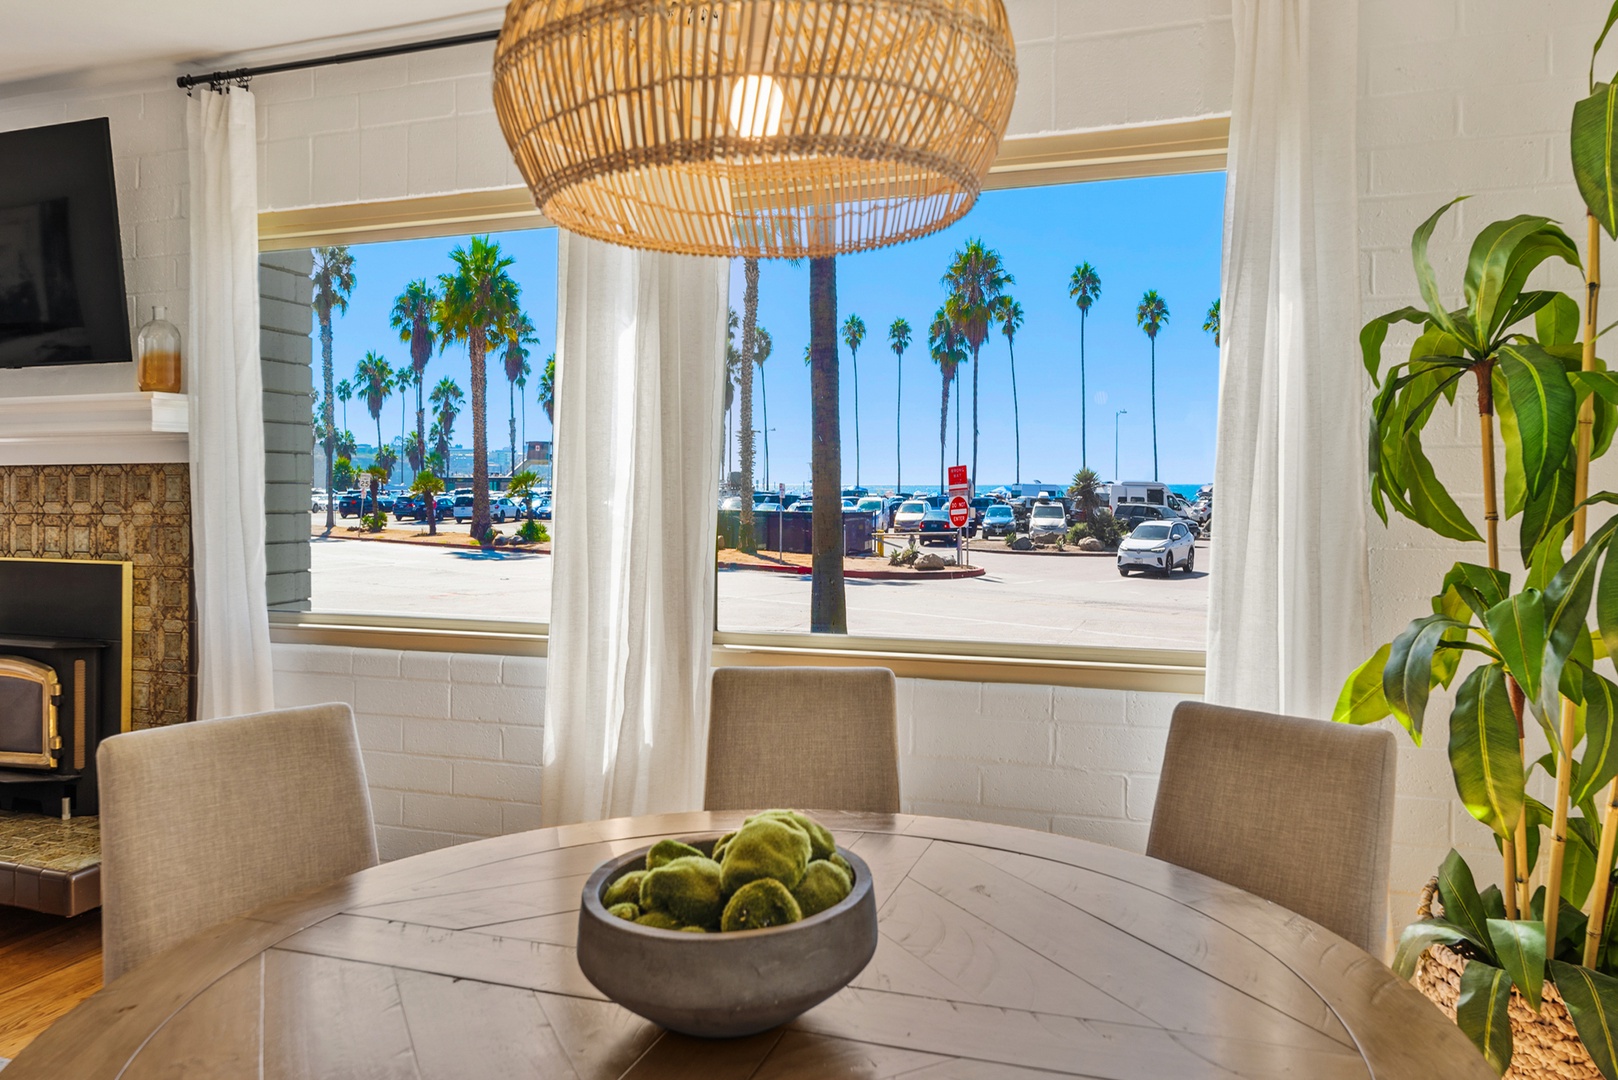 La Jolla Vacation Rentals, Hemingway's Beach House - Enjoy the beach view right from your dining table